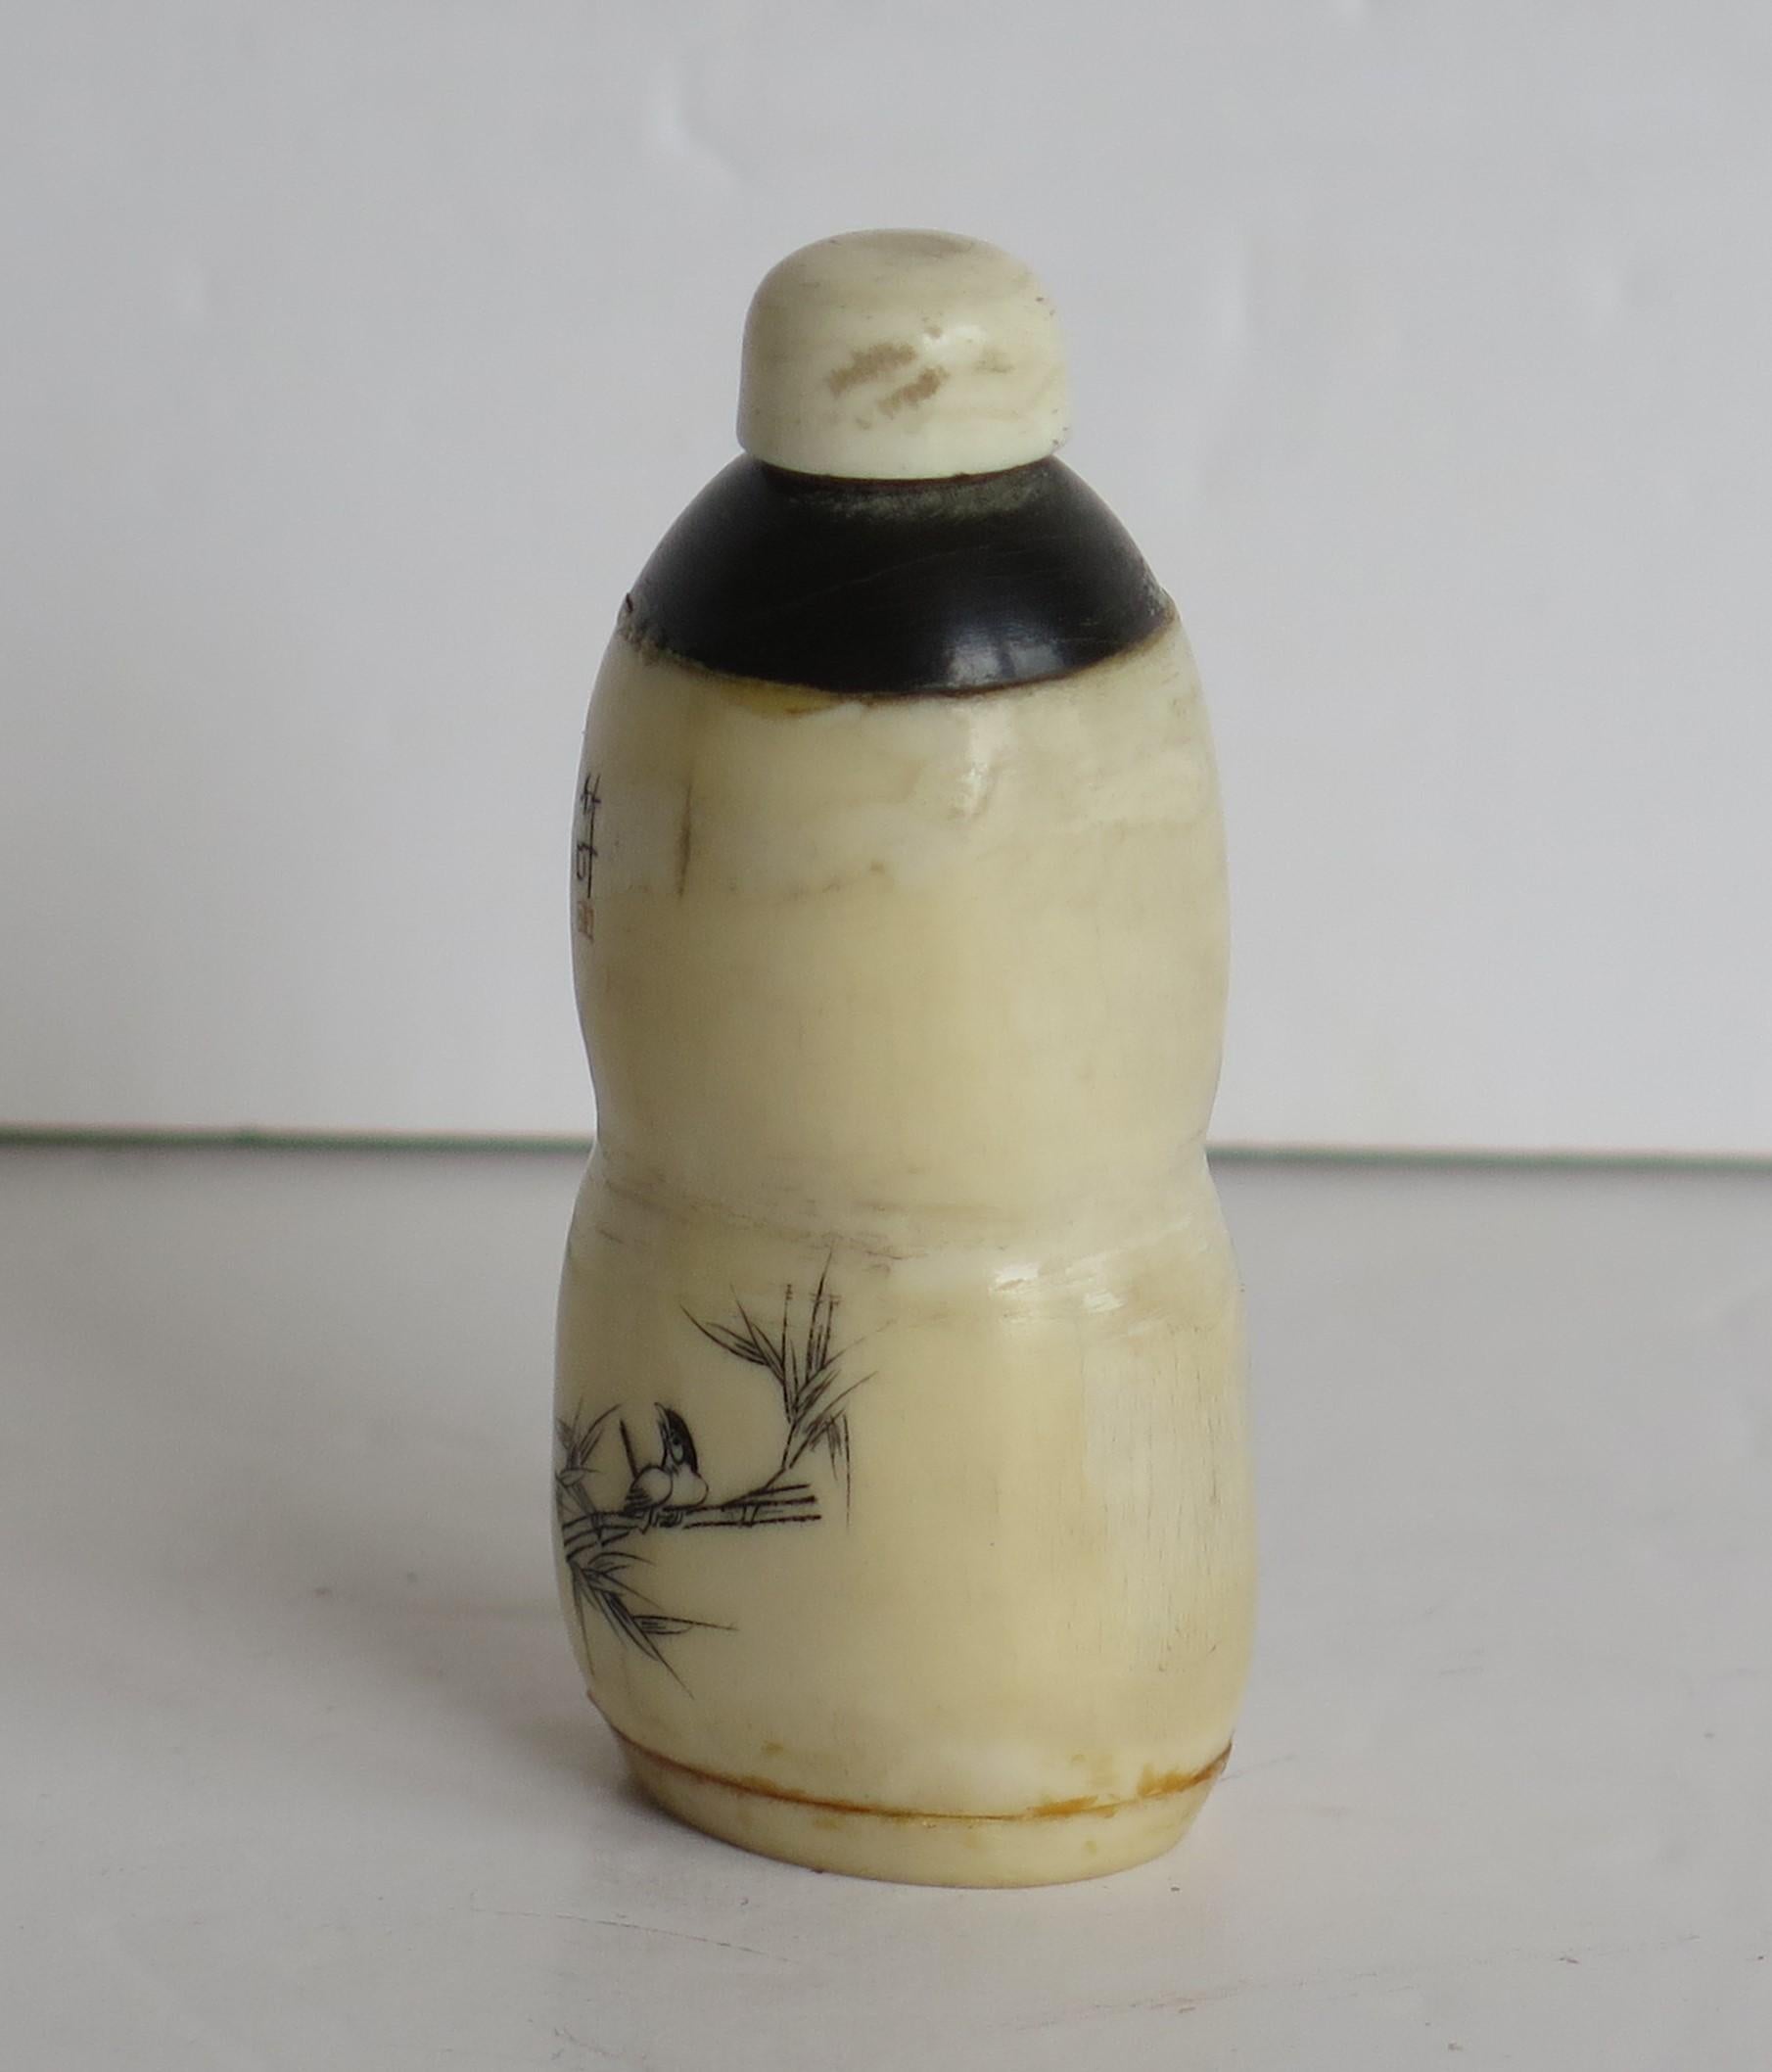 Hand-Carved Early 19th Century Chinese Snuff Bottle Hand Engraved & Inked on Bovine Bone